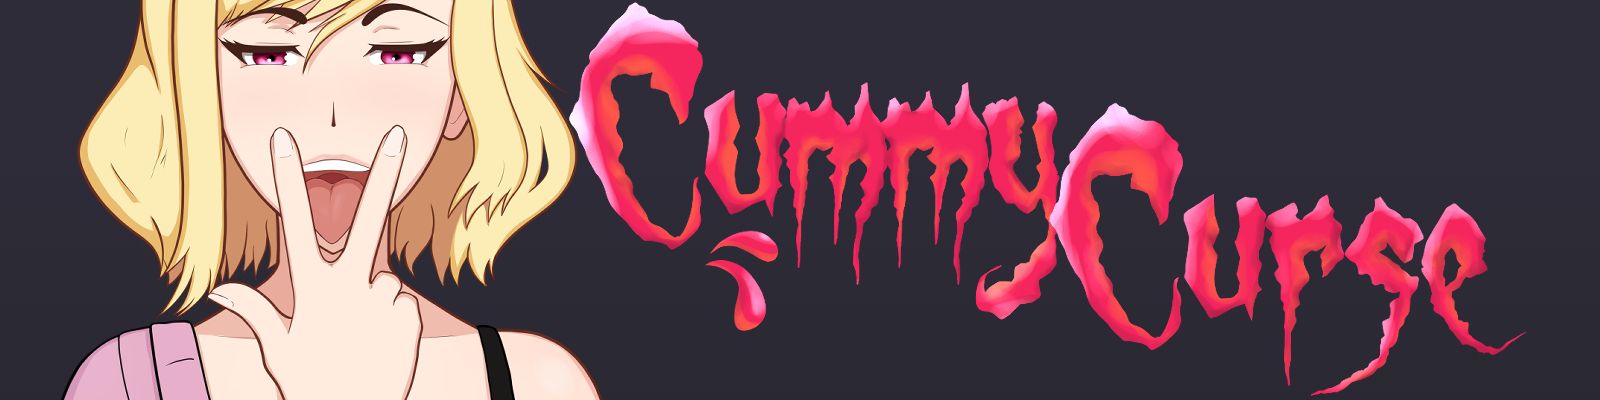 Cummy Curse Apk Android Adult Game Download (7)